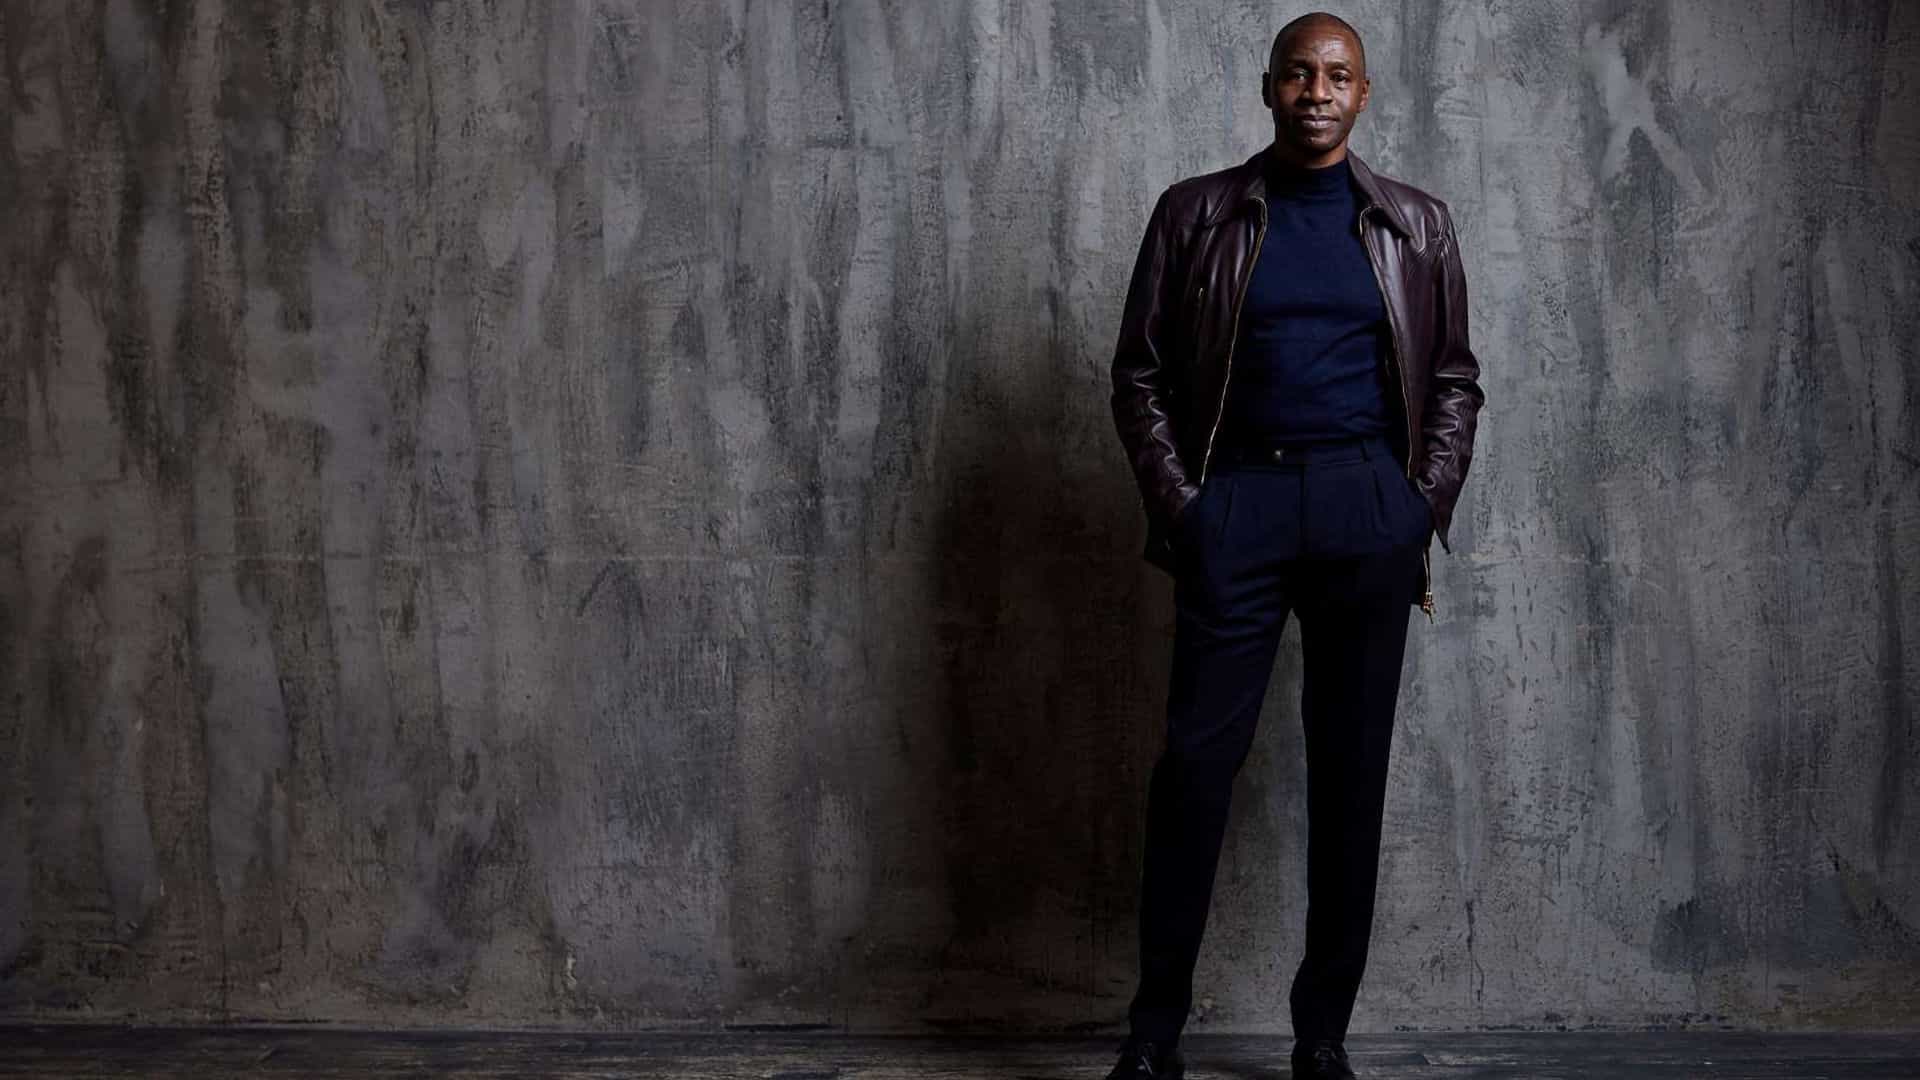 Tunde - Voice of The Lighthouse Family